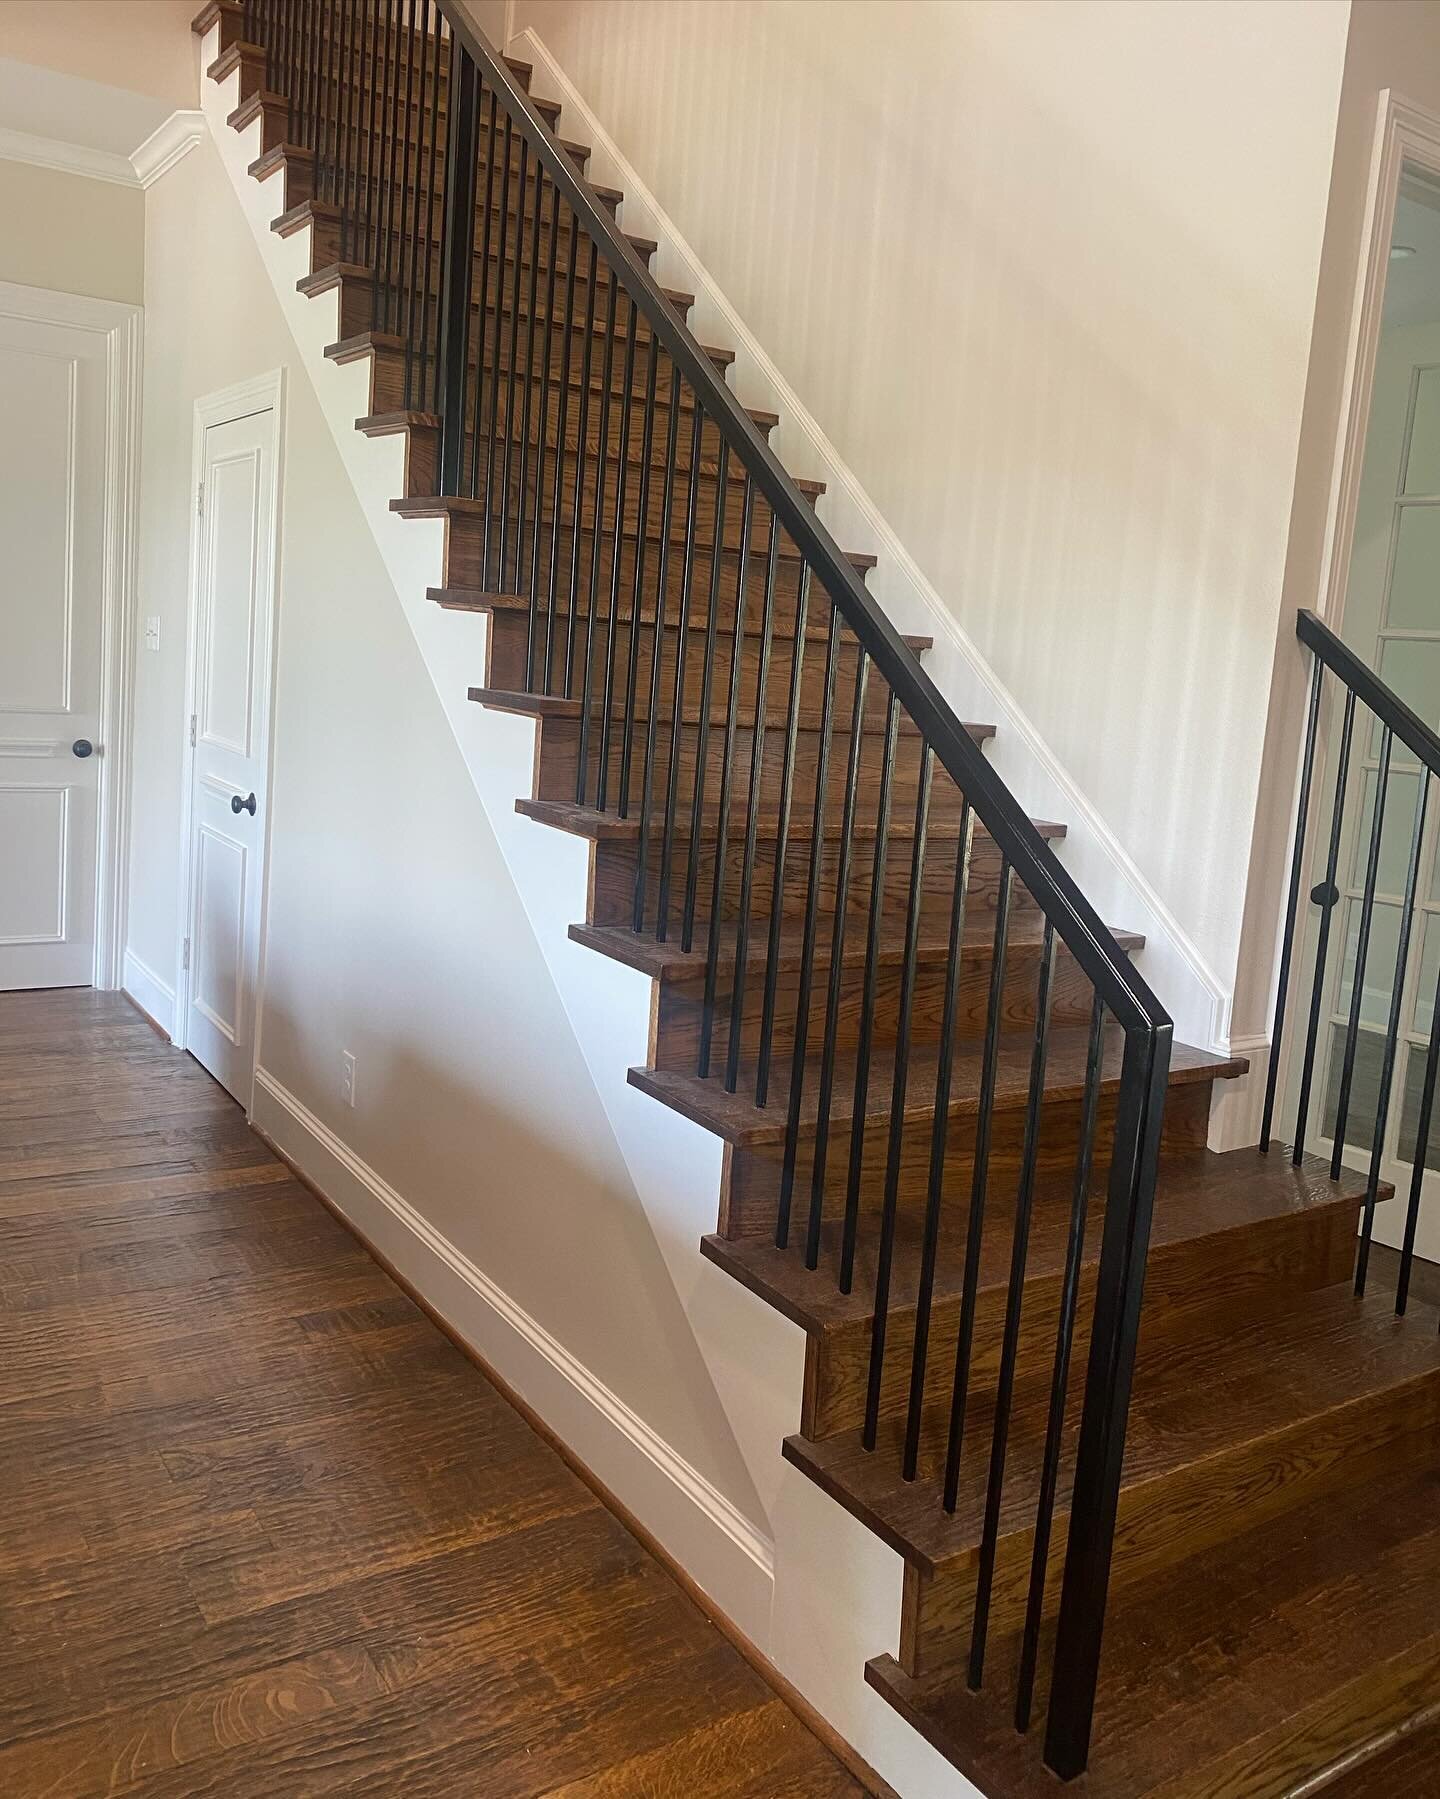 Swipe to see the before photos!🫢

In remodeling we realized the original stairs didn&rsquo;t fall within builders code! In response, we deepened the tread (stair steps), making the stairs less steep &amp; within code. An adjustment, that makes it sa